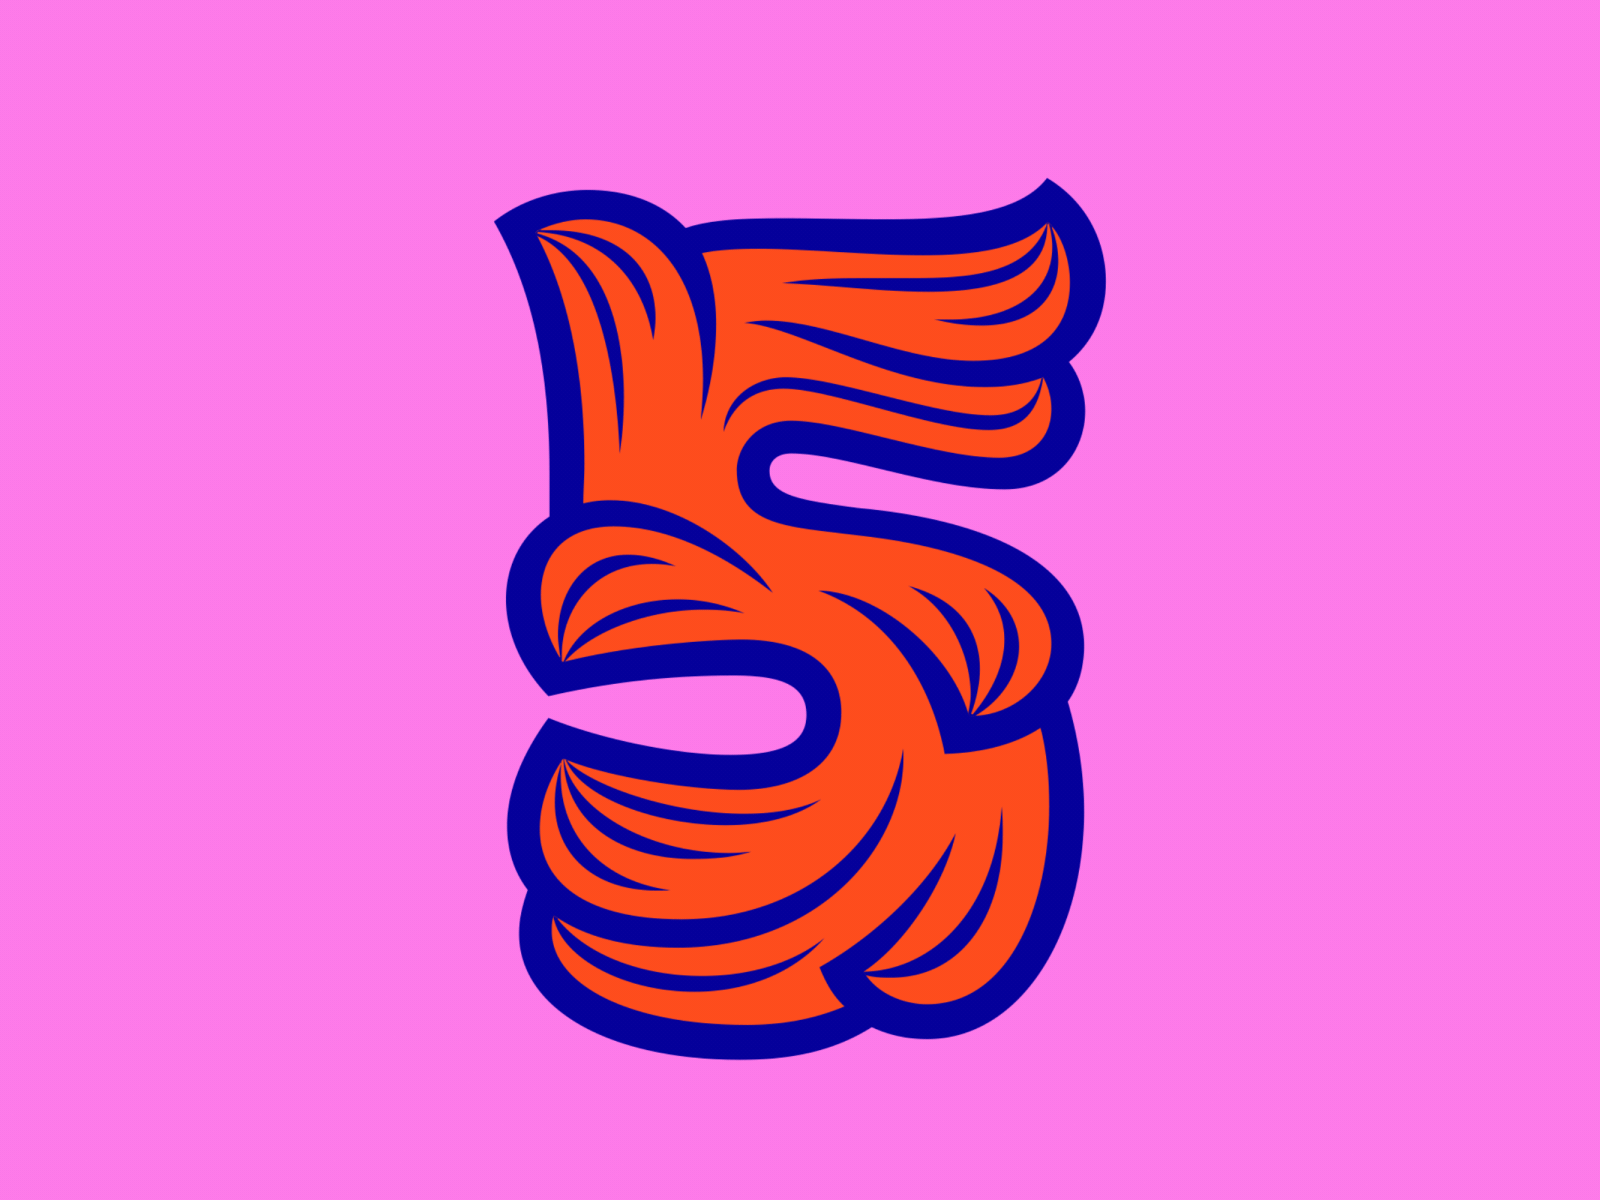 36 Days of Type / 5 36 days of type 36daysoftype 36daysoftype08 36dot ae after effects animated animated type animation animography colors design kinetic kinetic type motion motion design motion graphic motion graphics type typography